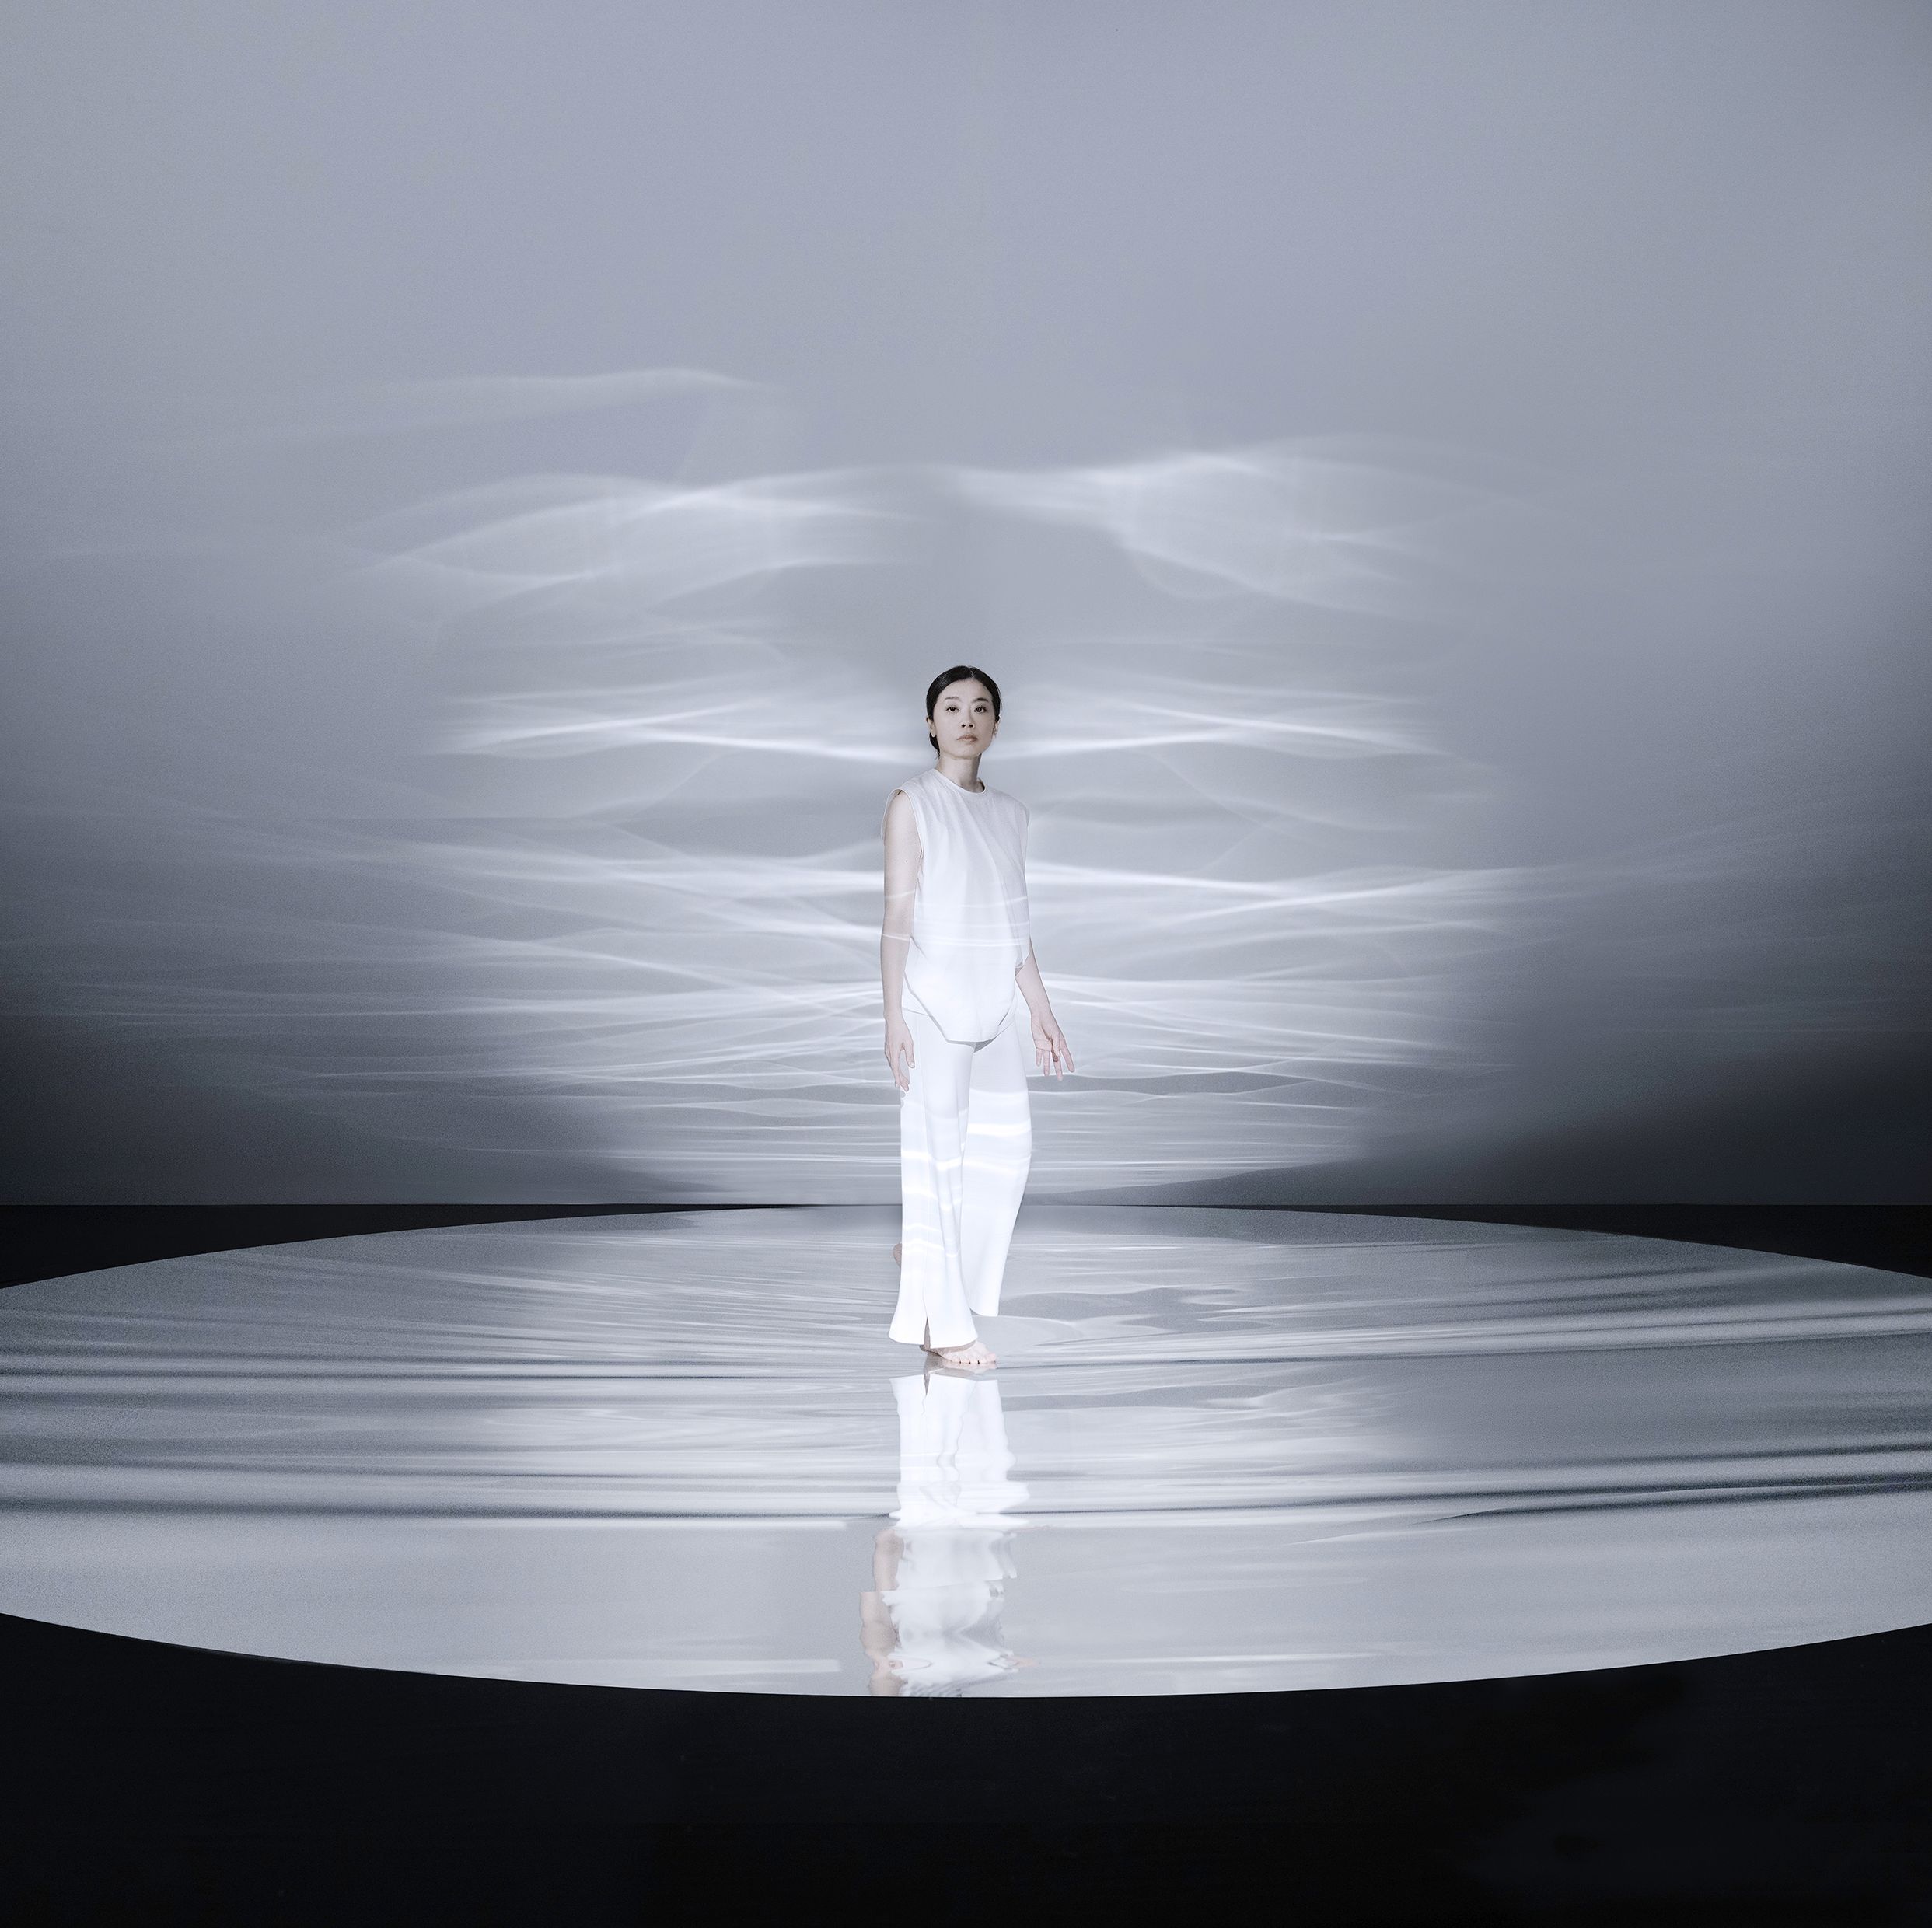 Wen-Chi Su's mesmerizing dance performance was inspired by light and water.